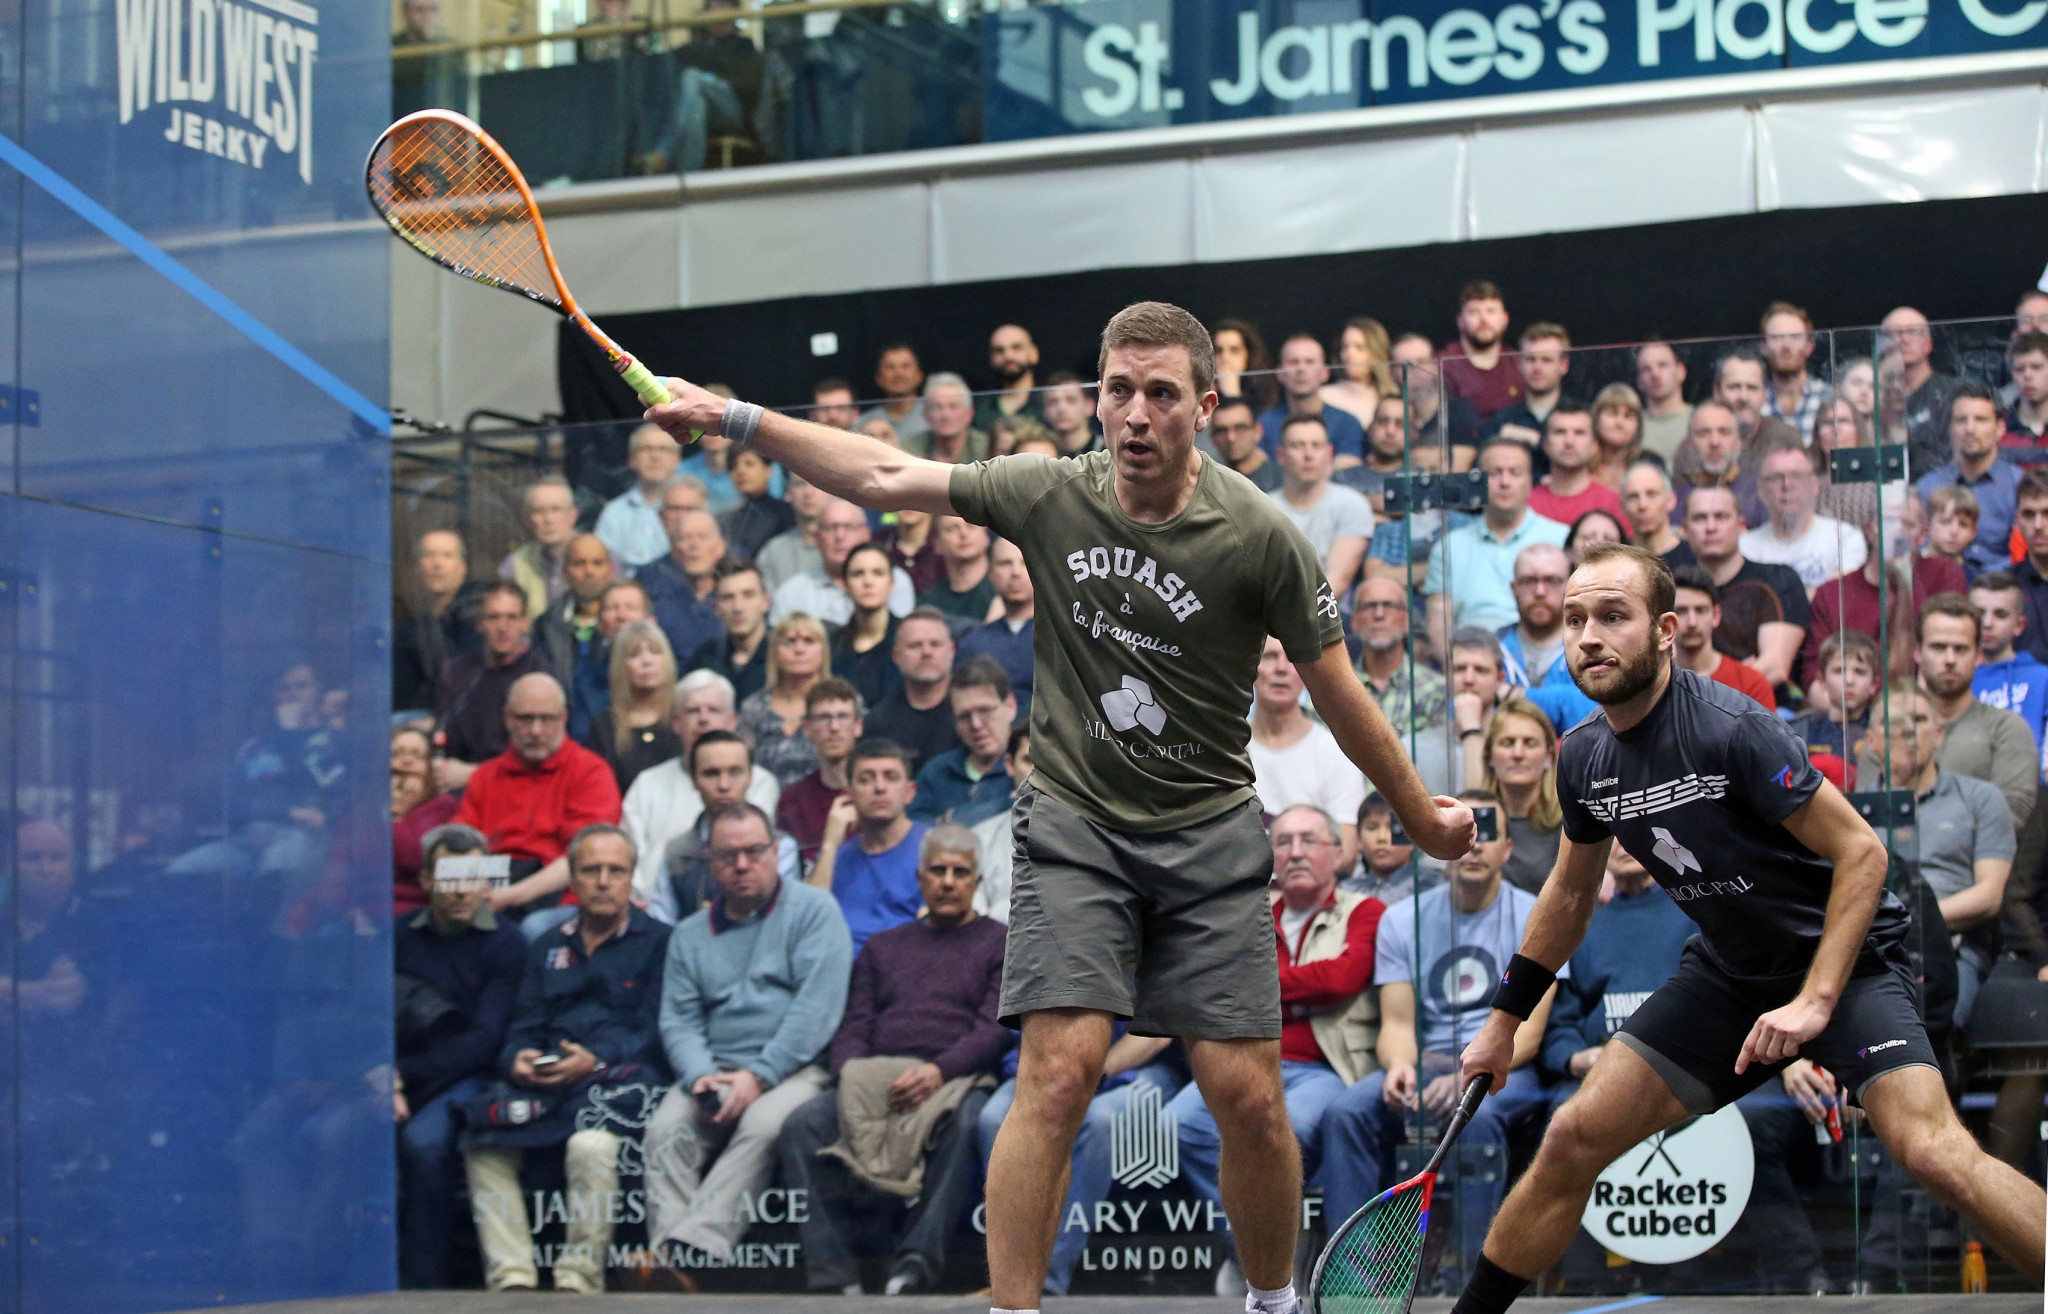 Mathieu Castegnet will face world number one Mohamed ElShorbagy in round two of the Canary Wharf Classic ©PSA